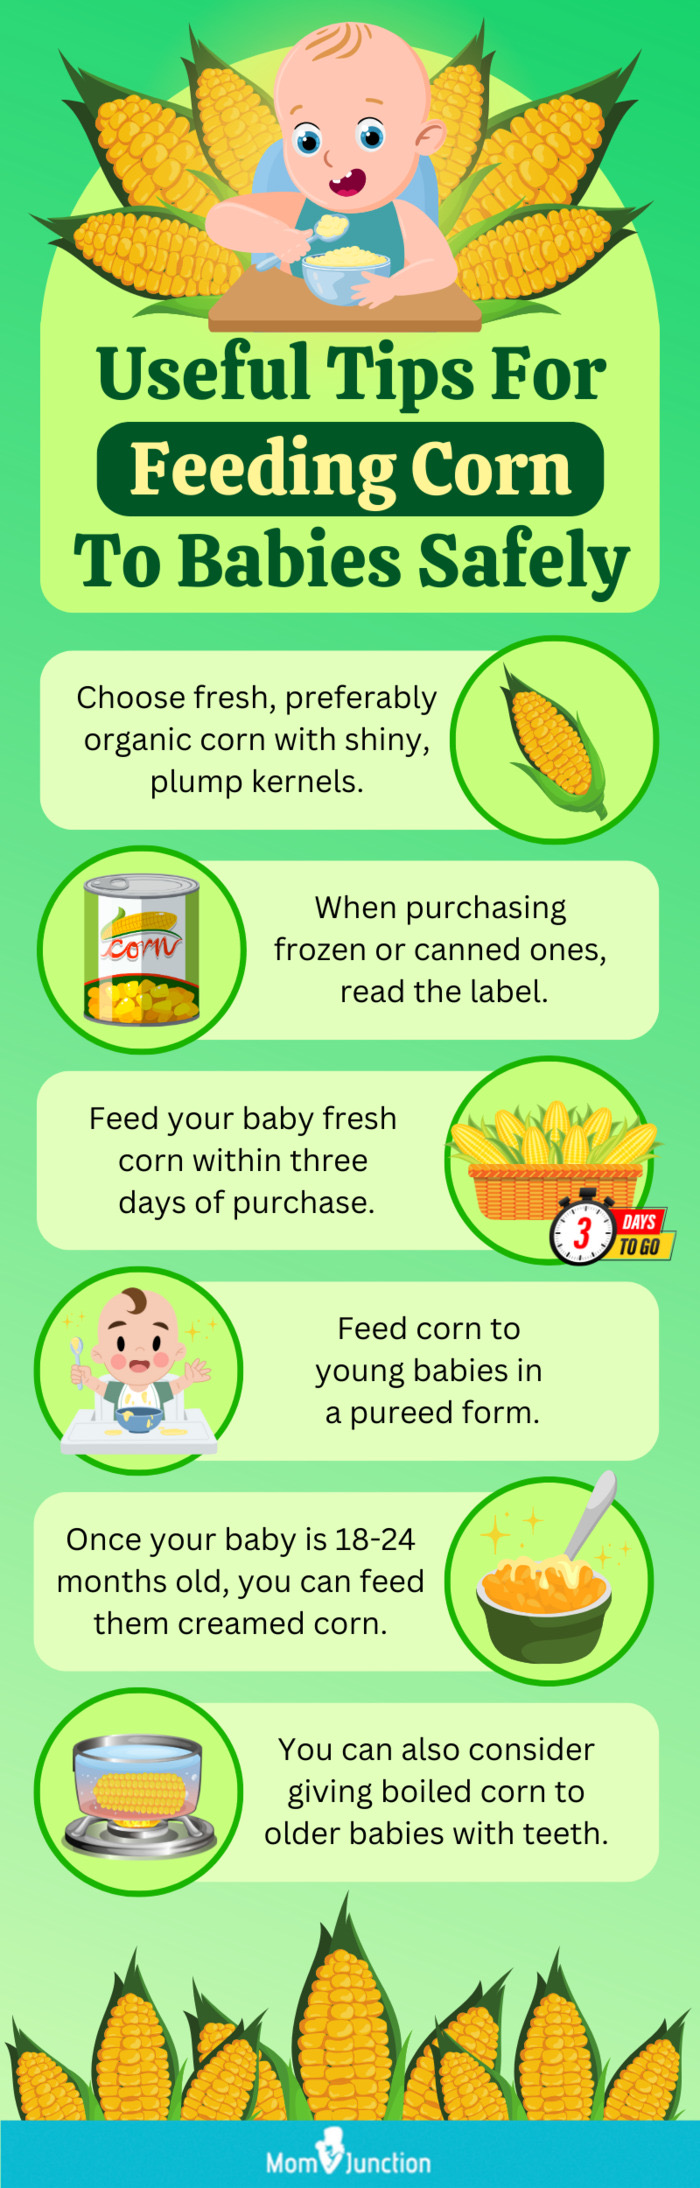 useful tips for feeding corn to babies safely (infographic)